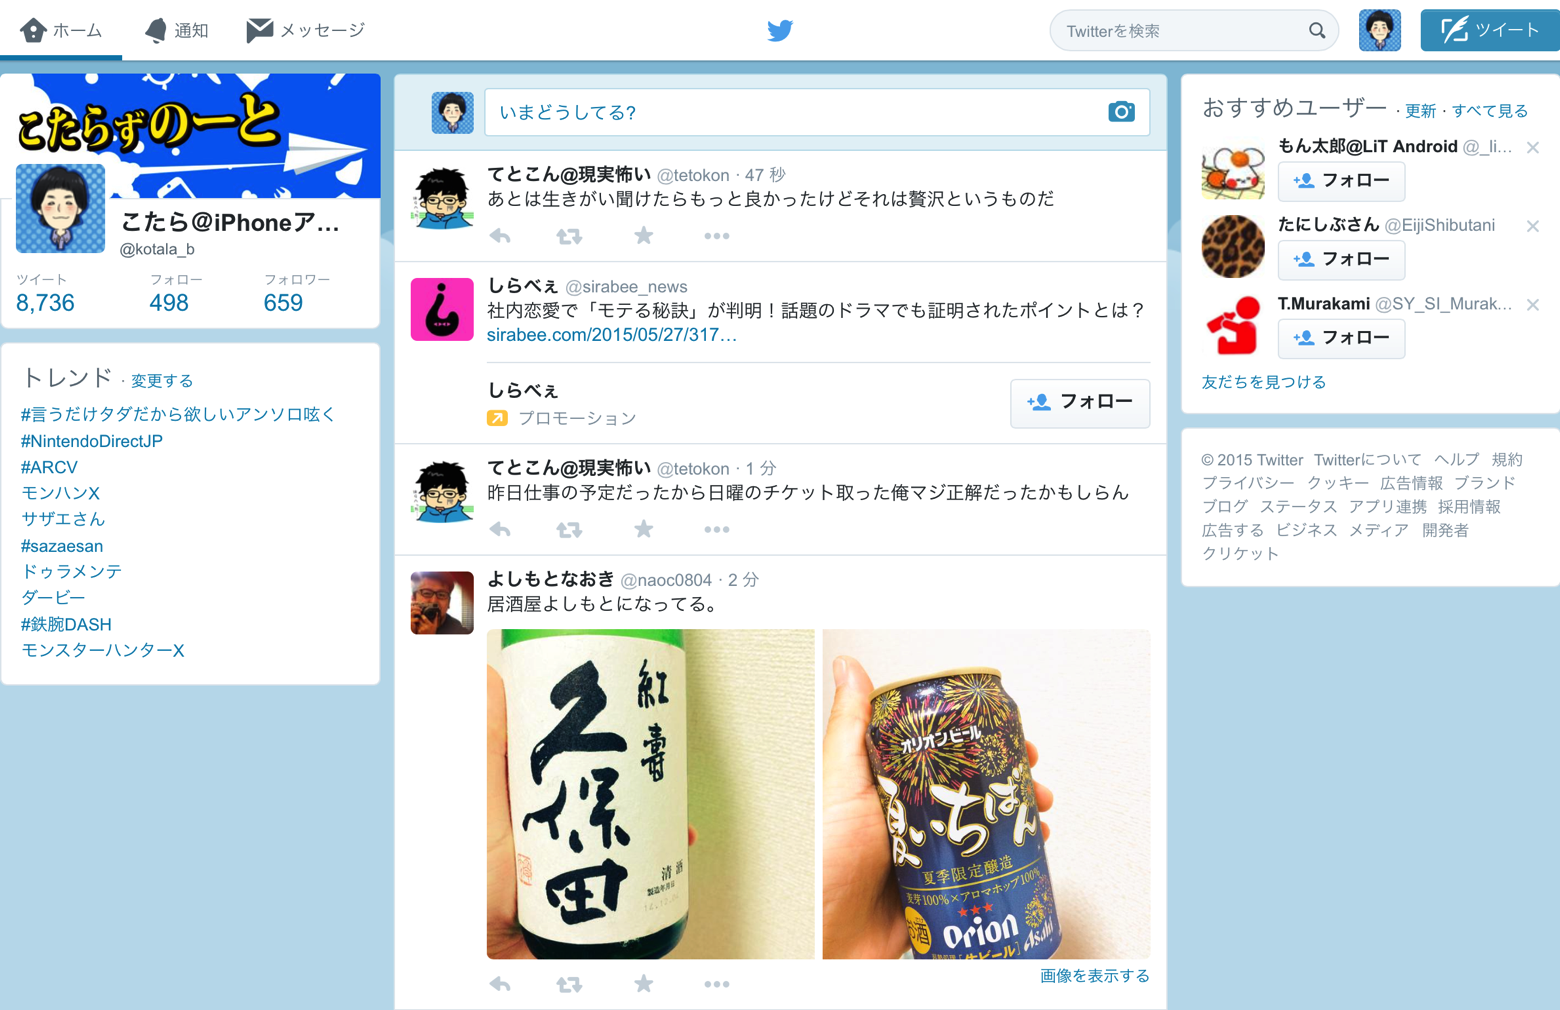 Twitter security 20150601 03